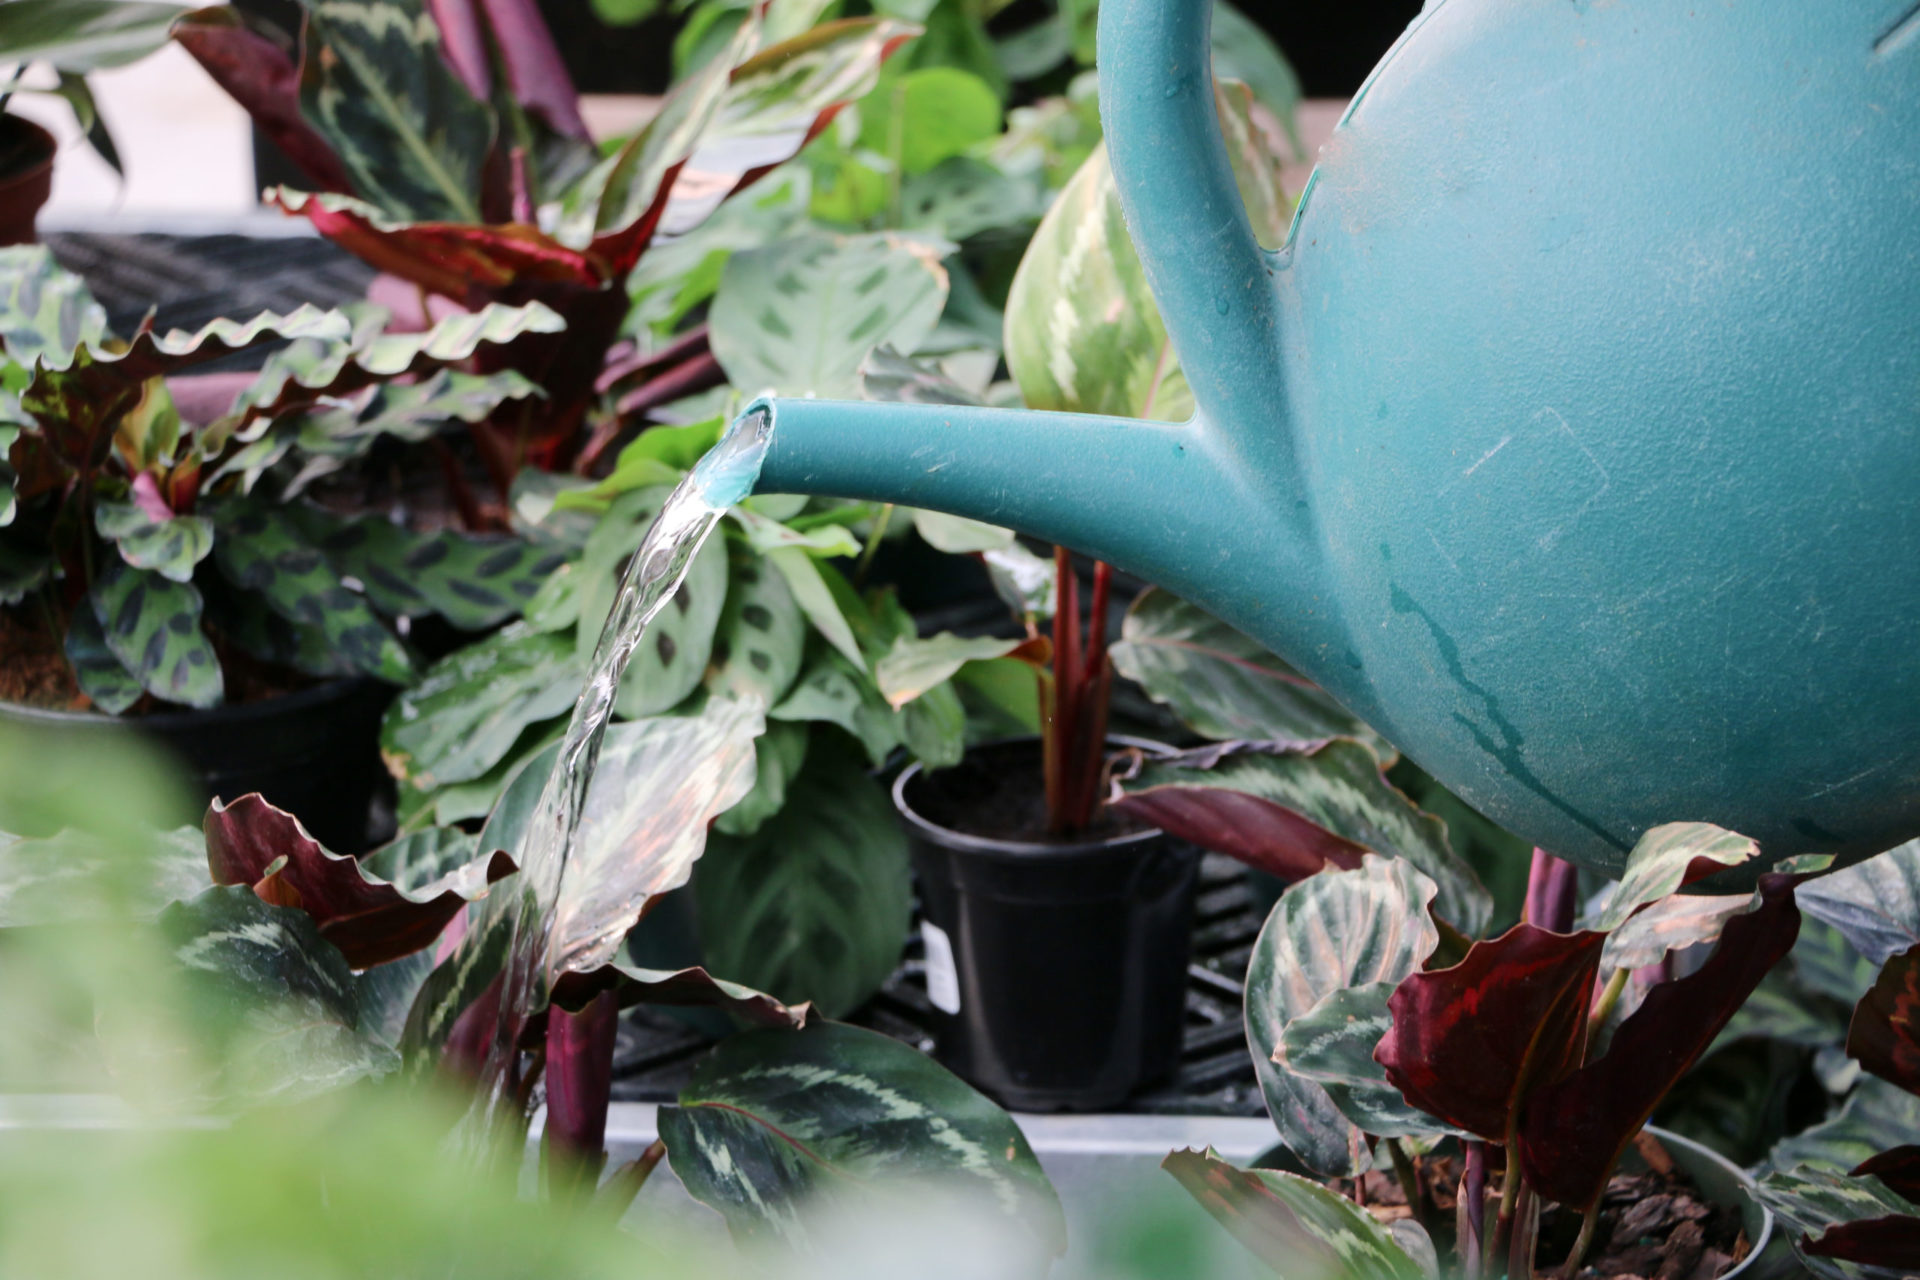 A green watering can is used to water bold-leafed houseplants